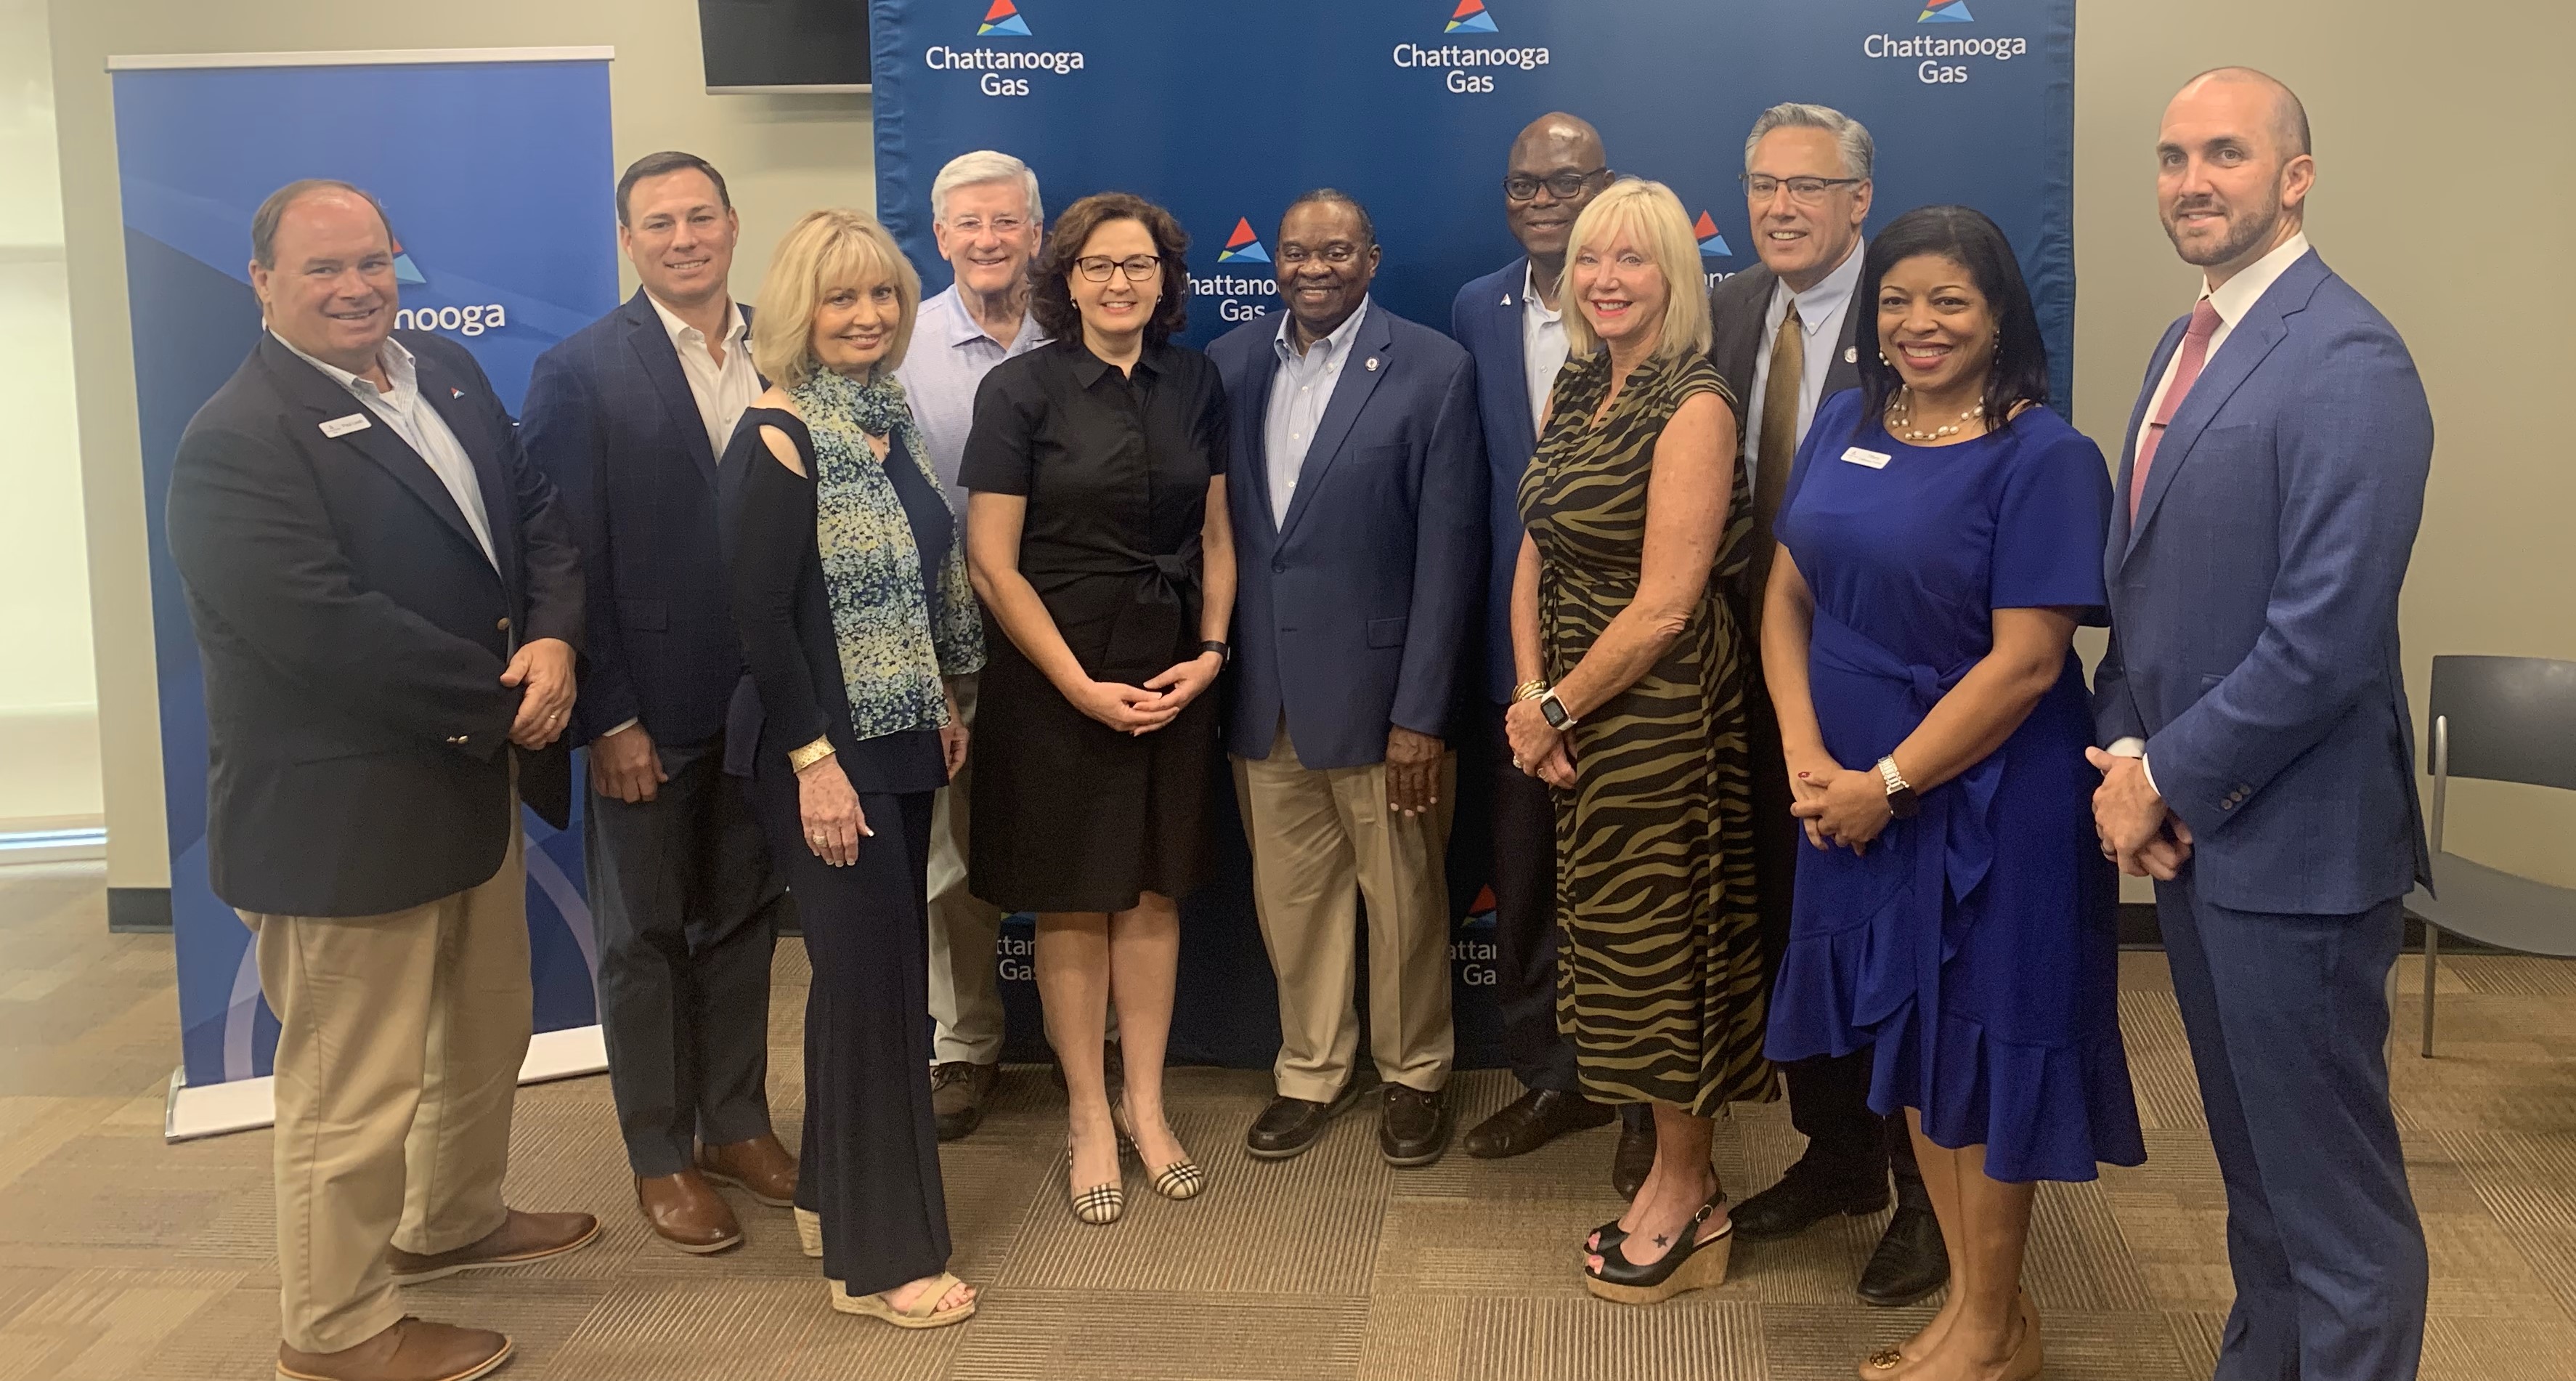 Chattanooga Gas announces 100% of its fuel supply for residential and small business customers now comes from Next Generation Natural Gas through an agreement with Williams Sequent Energy.